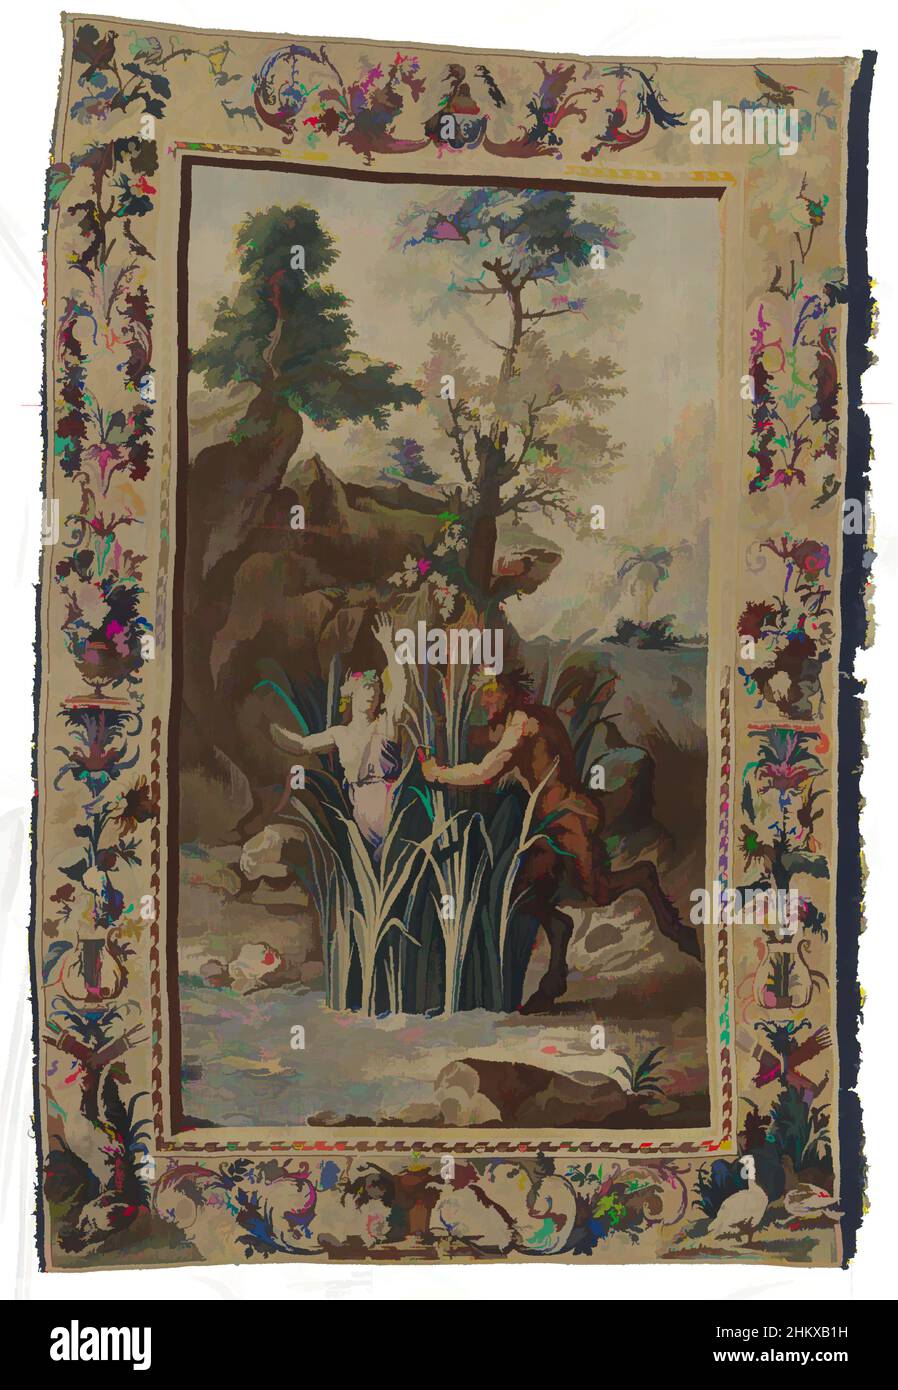 Art inspired by Pan and Syrinx, Pan and Syrinx, The Metamorphoses of Ovid (series title), Tapestry with Pan pursuing Syrinx (Ovid, Metamorphoses, book I), from a series of tapestries with representations borrowed from Ovid's Metamorphoses., Manufacture Royale des Gobelins (workshop of, Classic works modernized by Artotop with a splash of modernity. Shapes, color and value, eye-catching visual impact on art. Emotions through freedom of artworks in a contemporary way. A timeless message pursuing a wildly creative new direction. Artists turning to the digital medium and creating the Artotop NFT Stock Photo